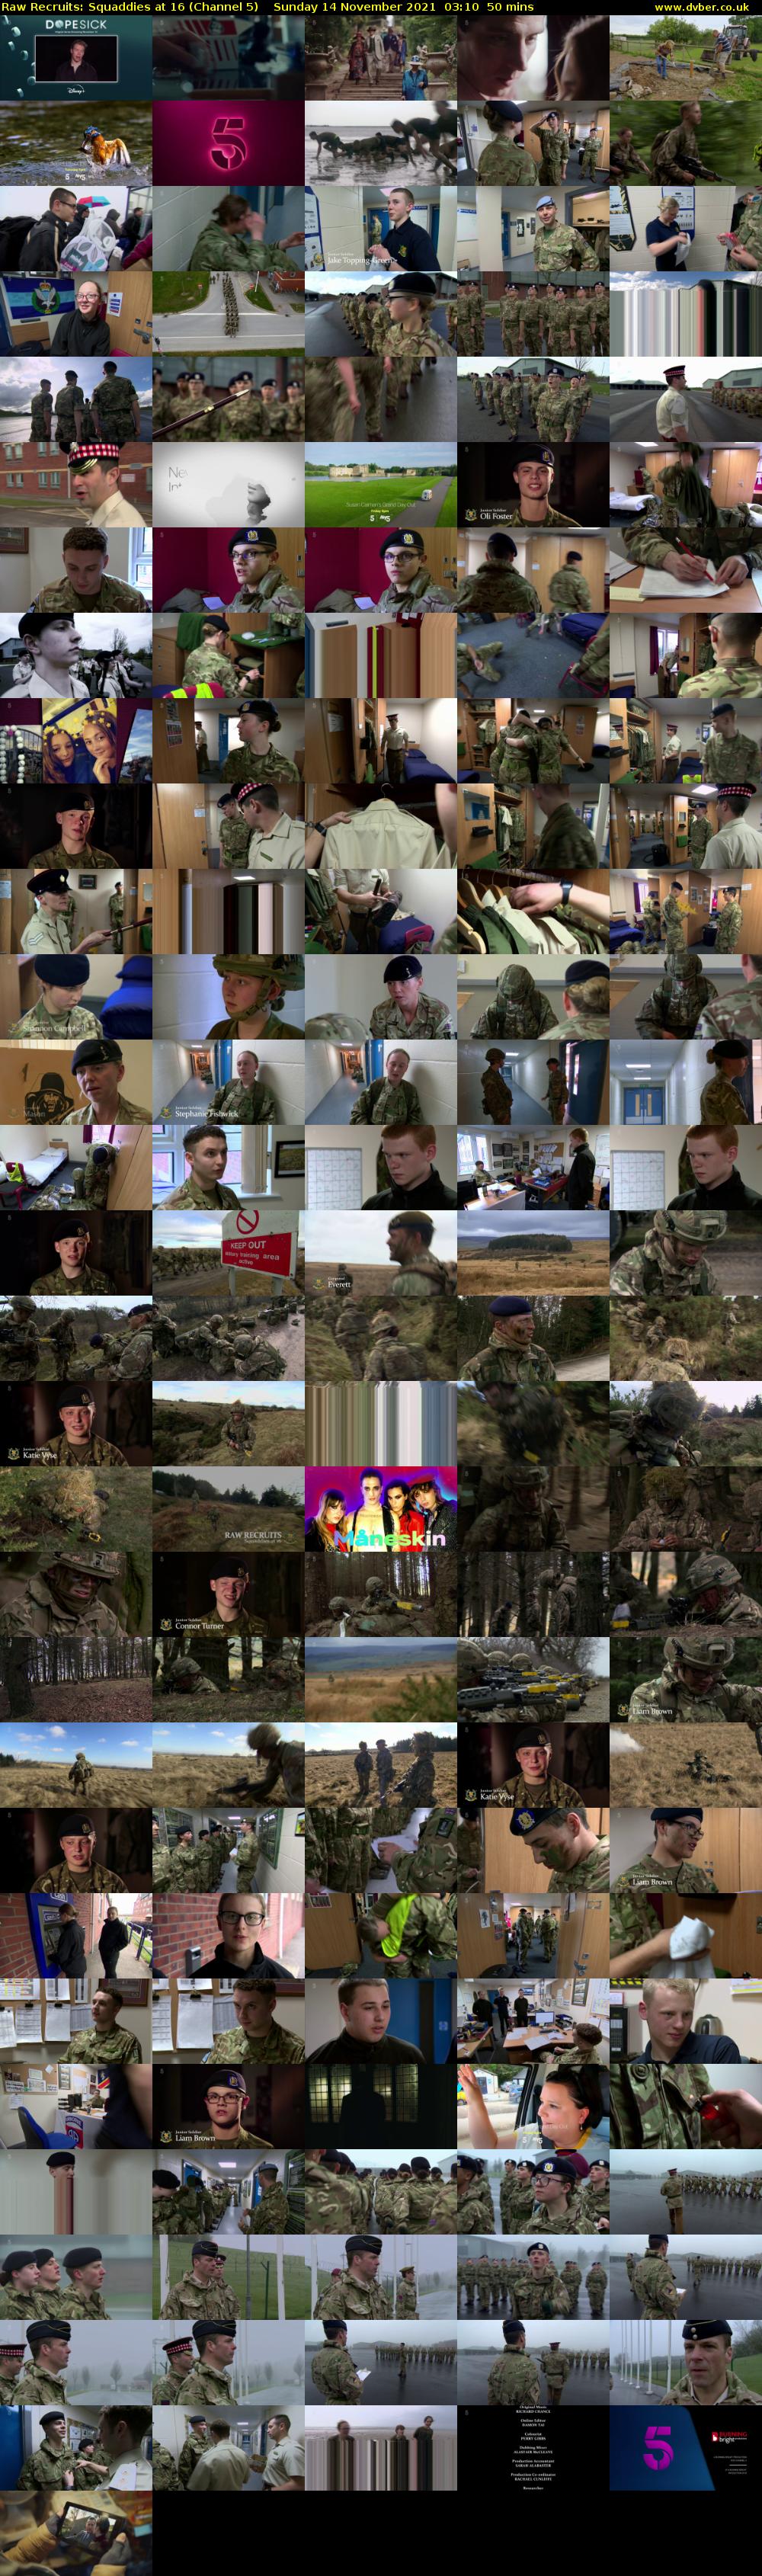 Raw Recruits: Squaddies at 16 (Channel 5) Sunday 14 November 2021 03:10 - 04:00